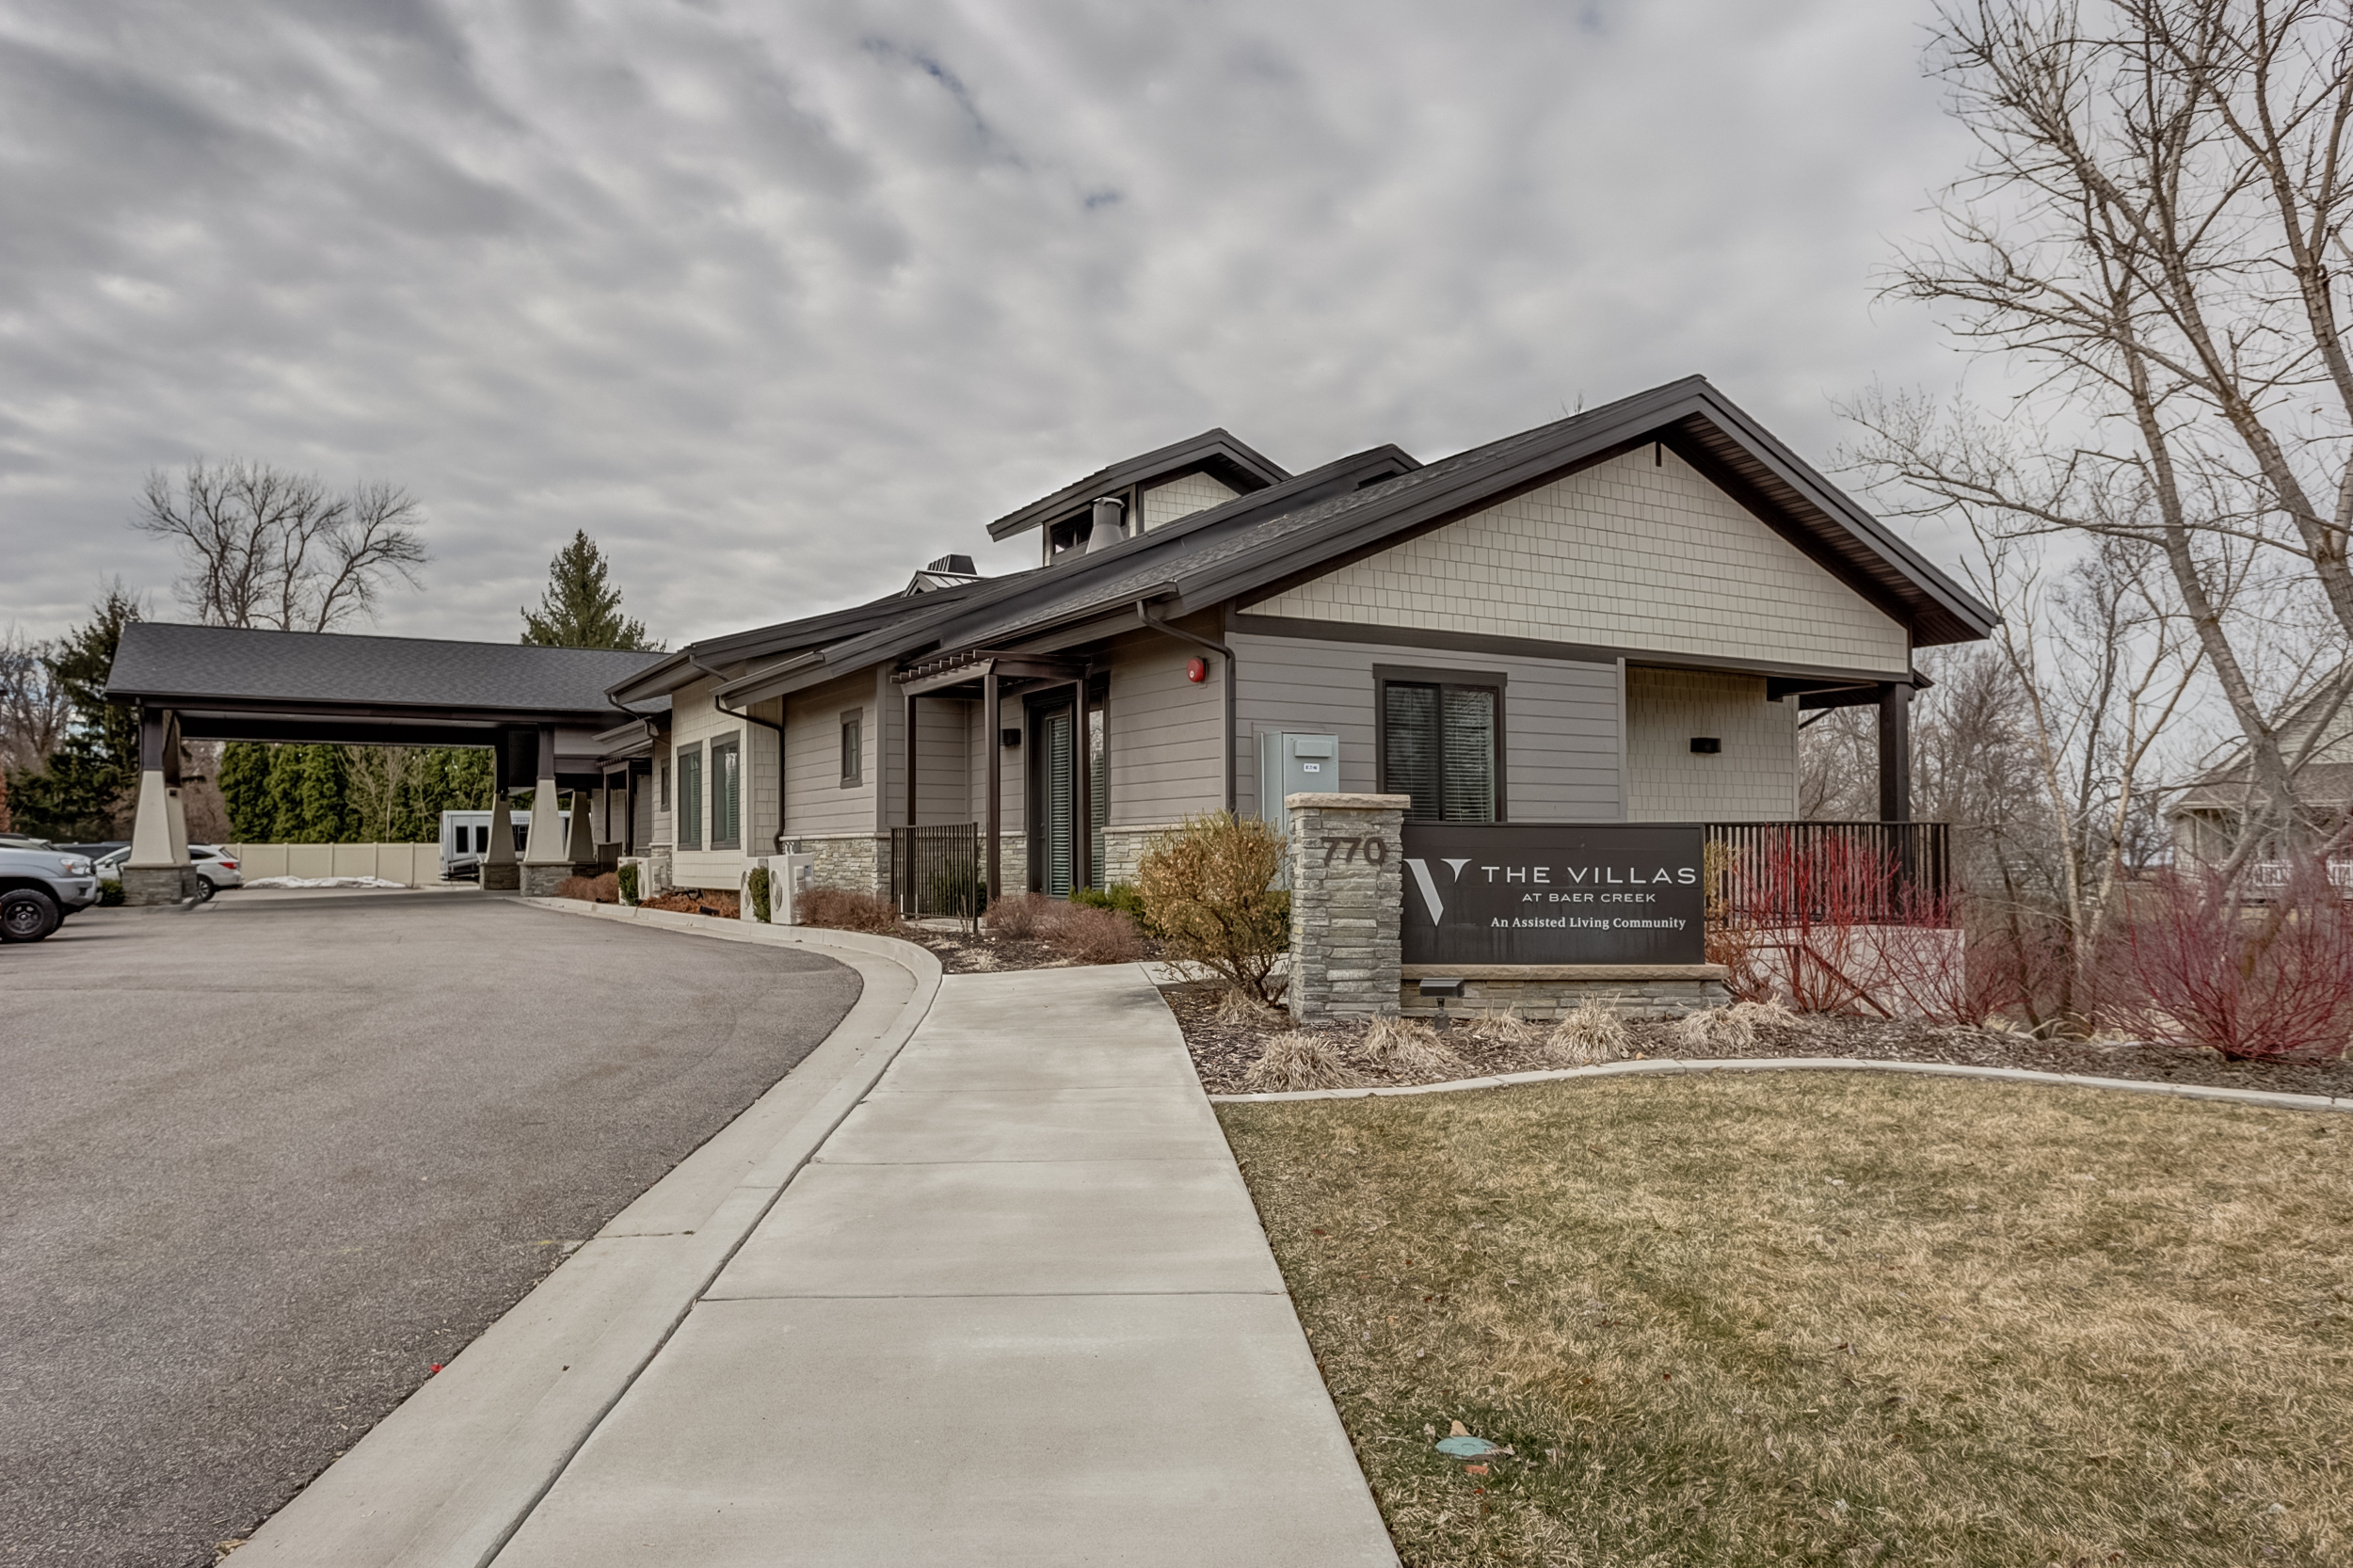 Assisted living facility in Kaysville, Ut